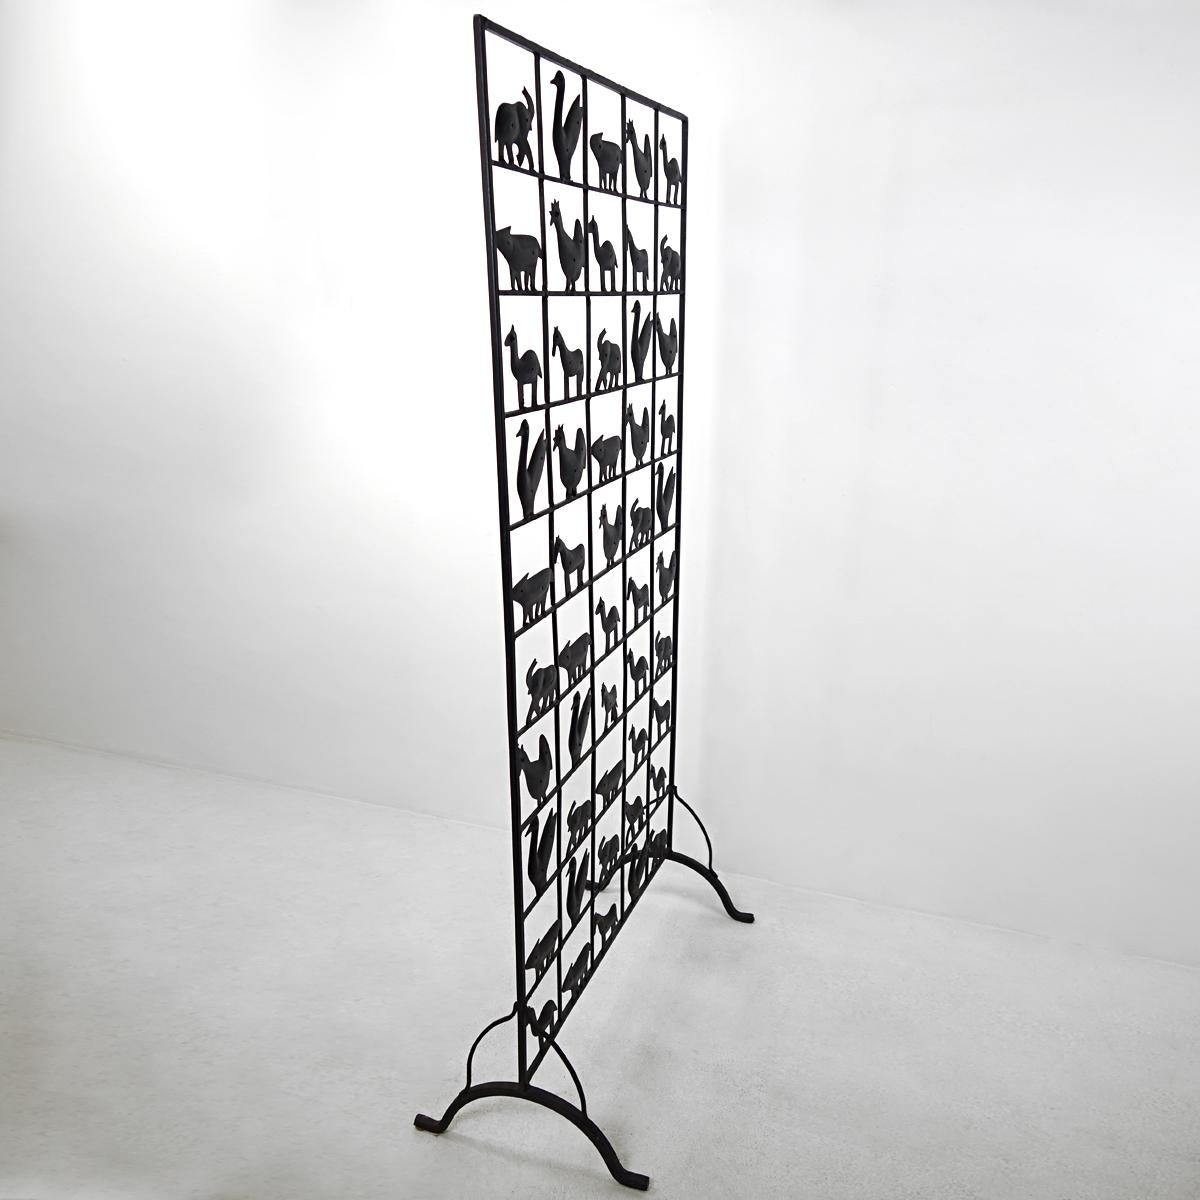 French Mid-Century Modern Wrought Iron Screen or Room Divider by Atelier de Marolles